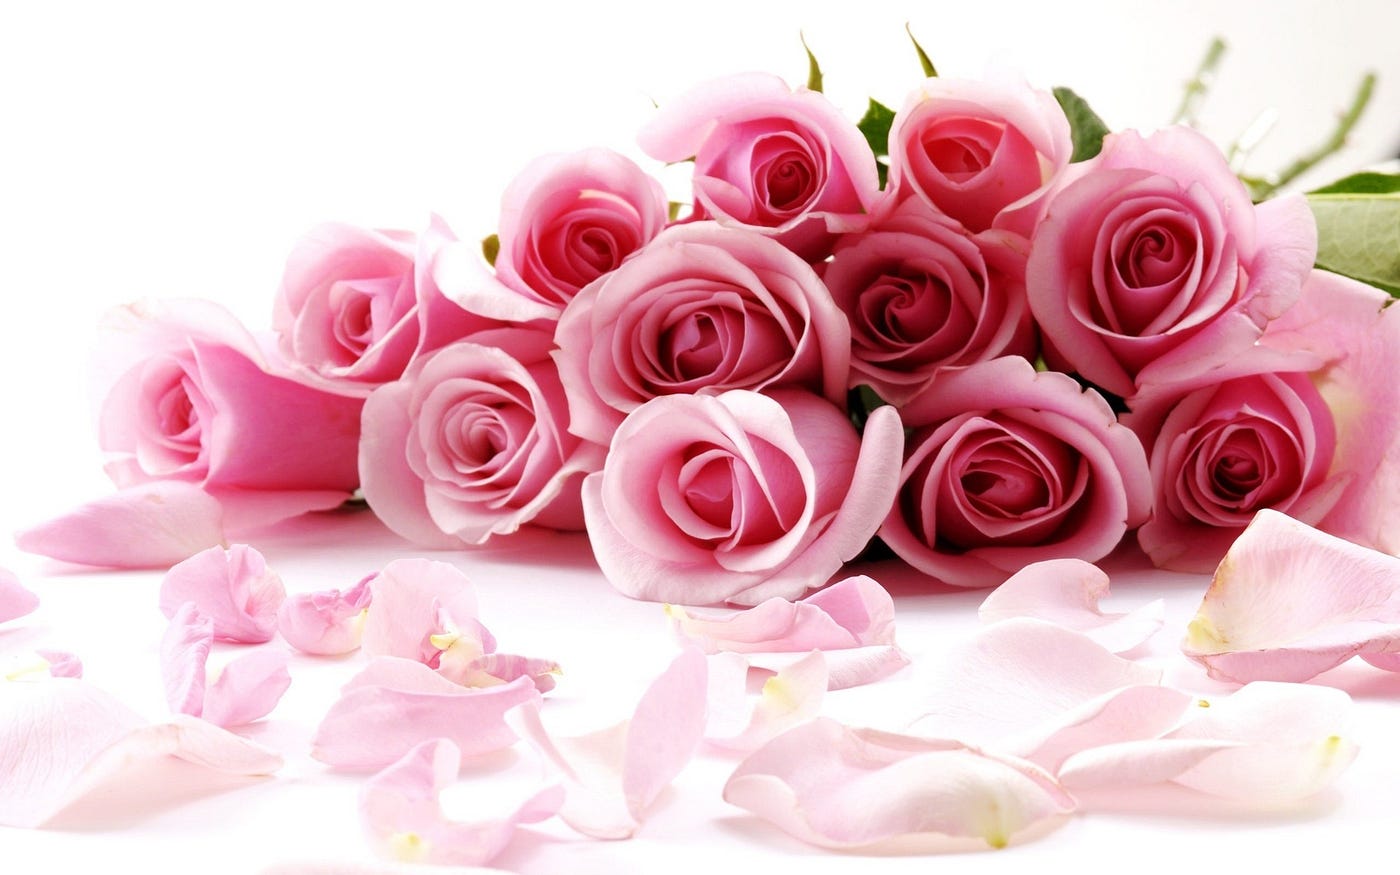 Send Beautiful Flowers To Make Loved One S Day Special By Ritika Sharma Medium